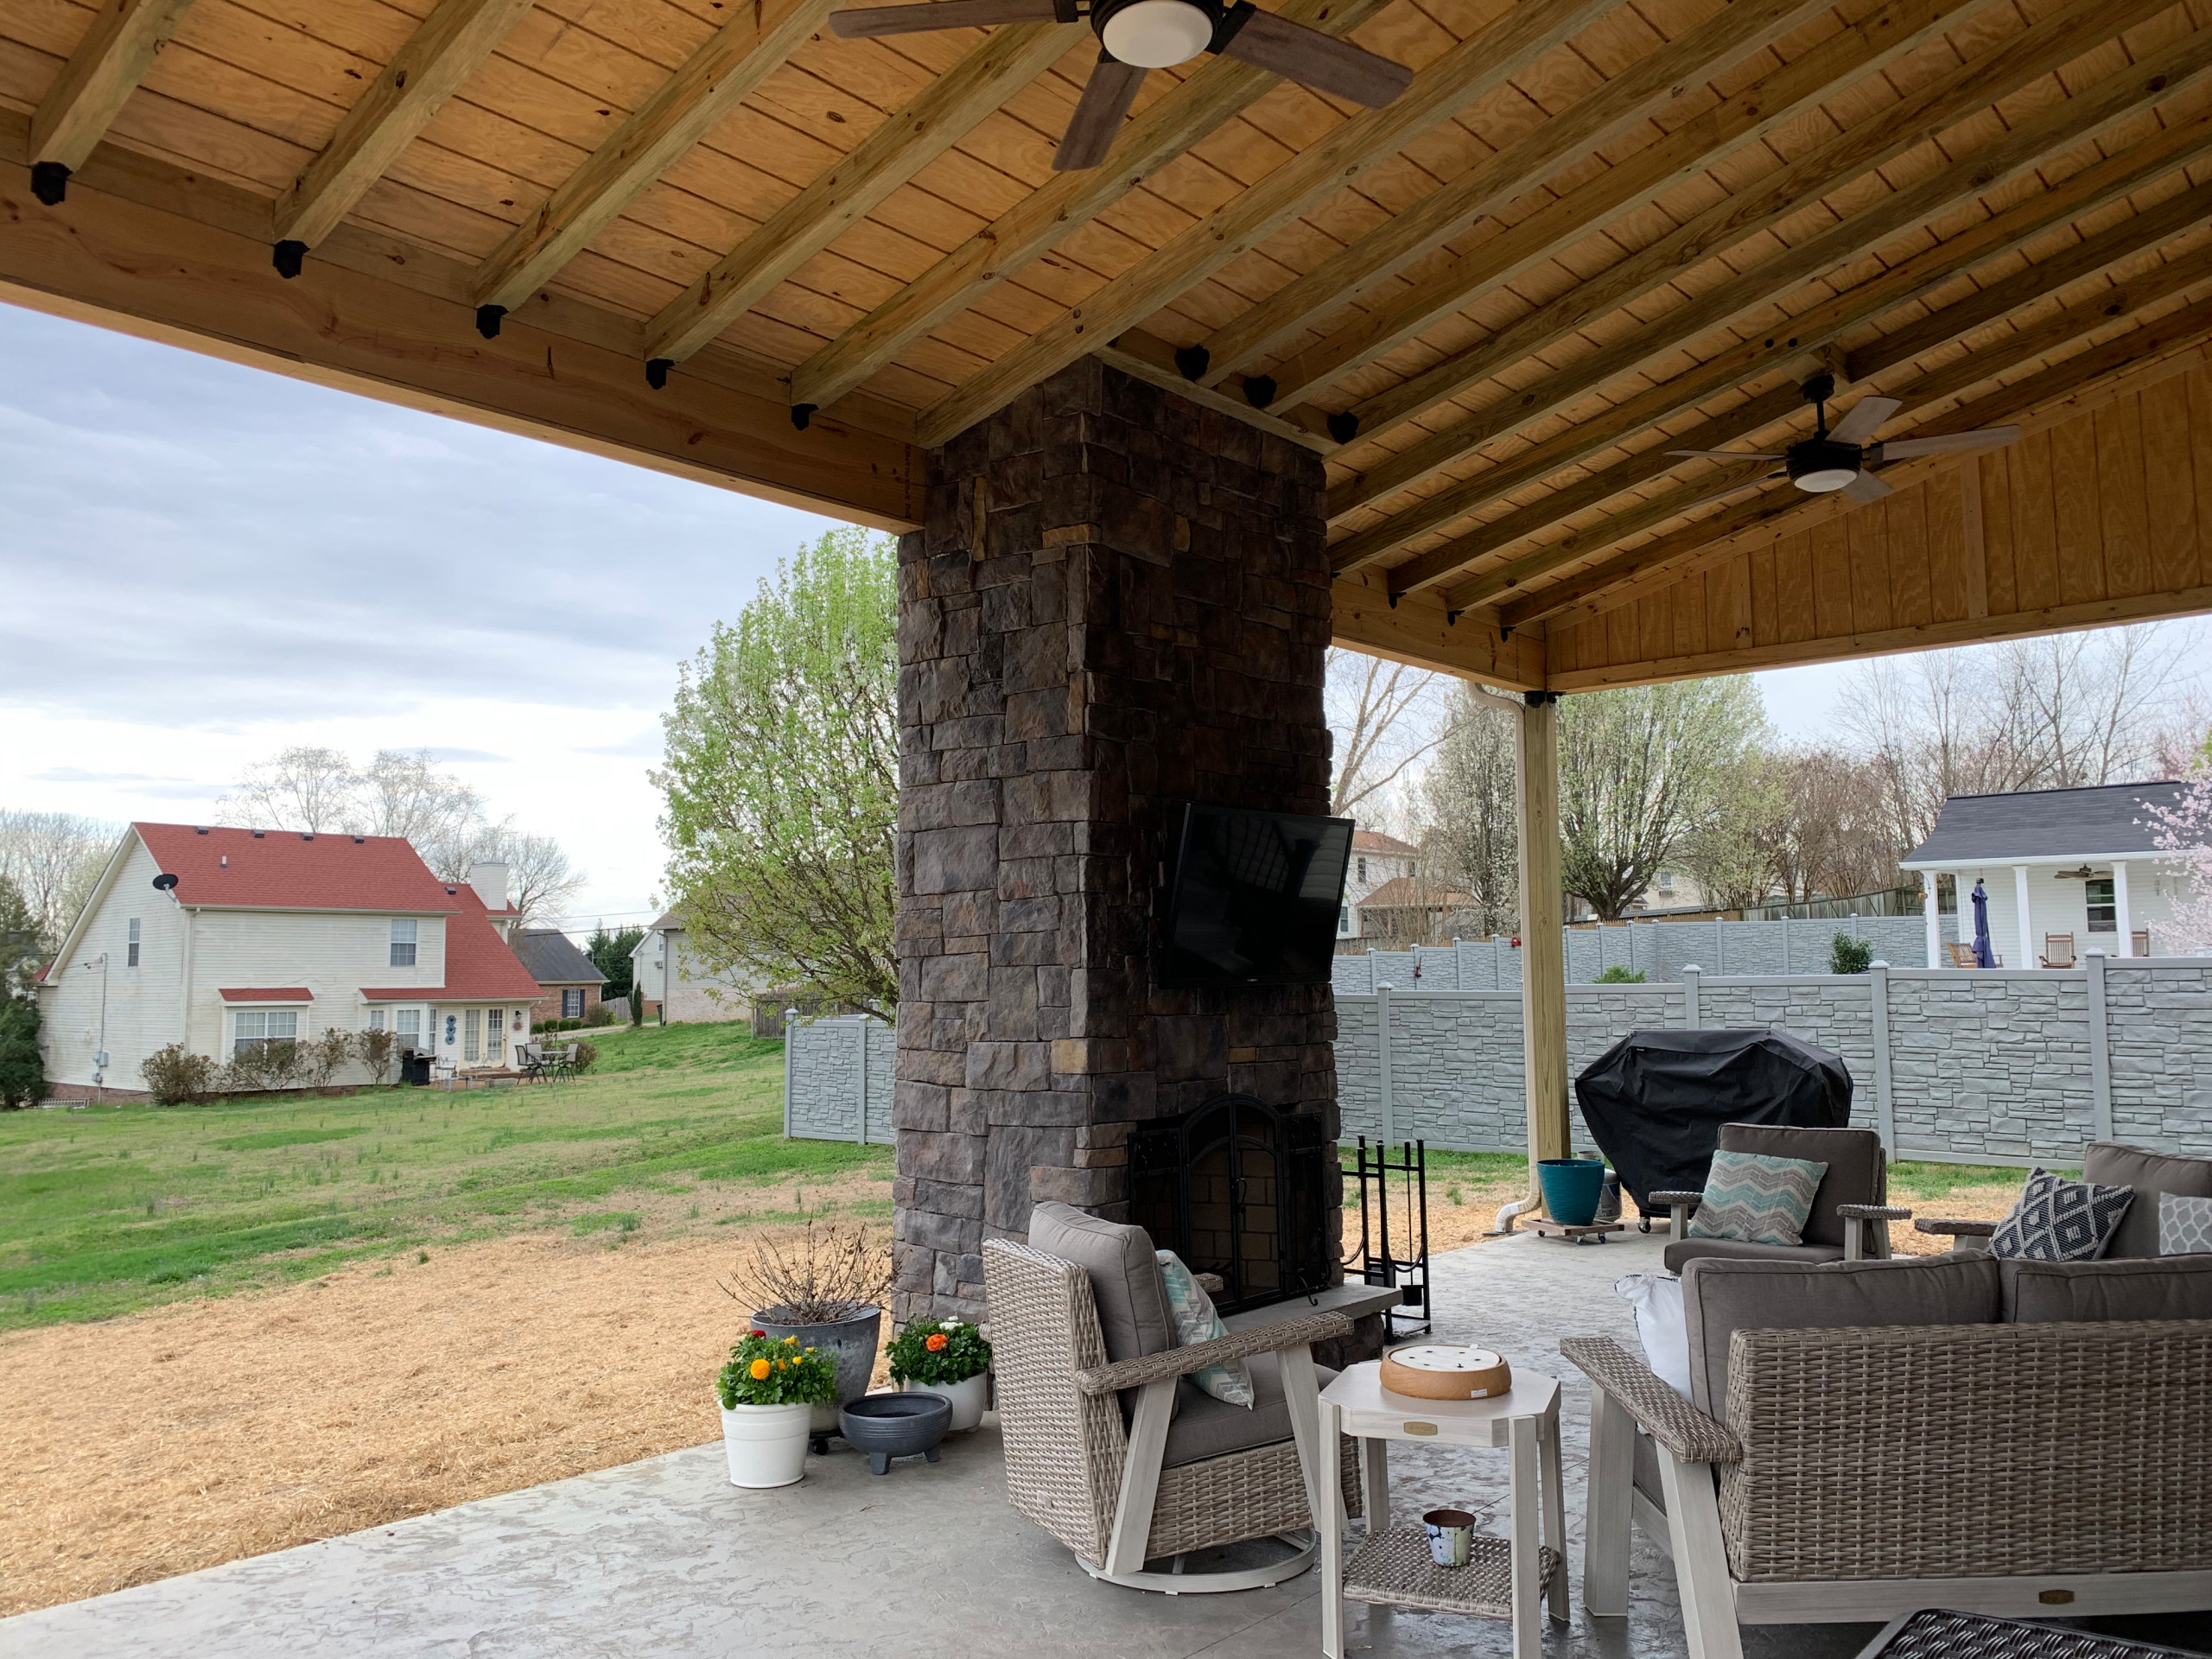 Shed roof Patio w/fireplace